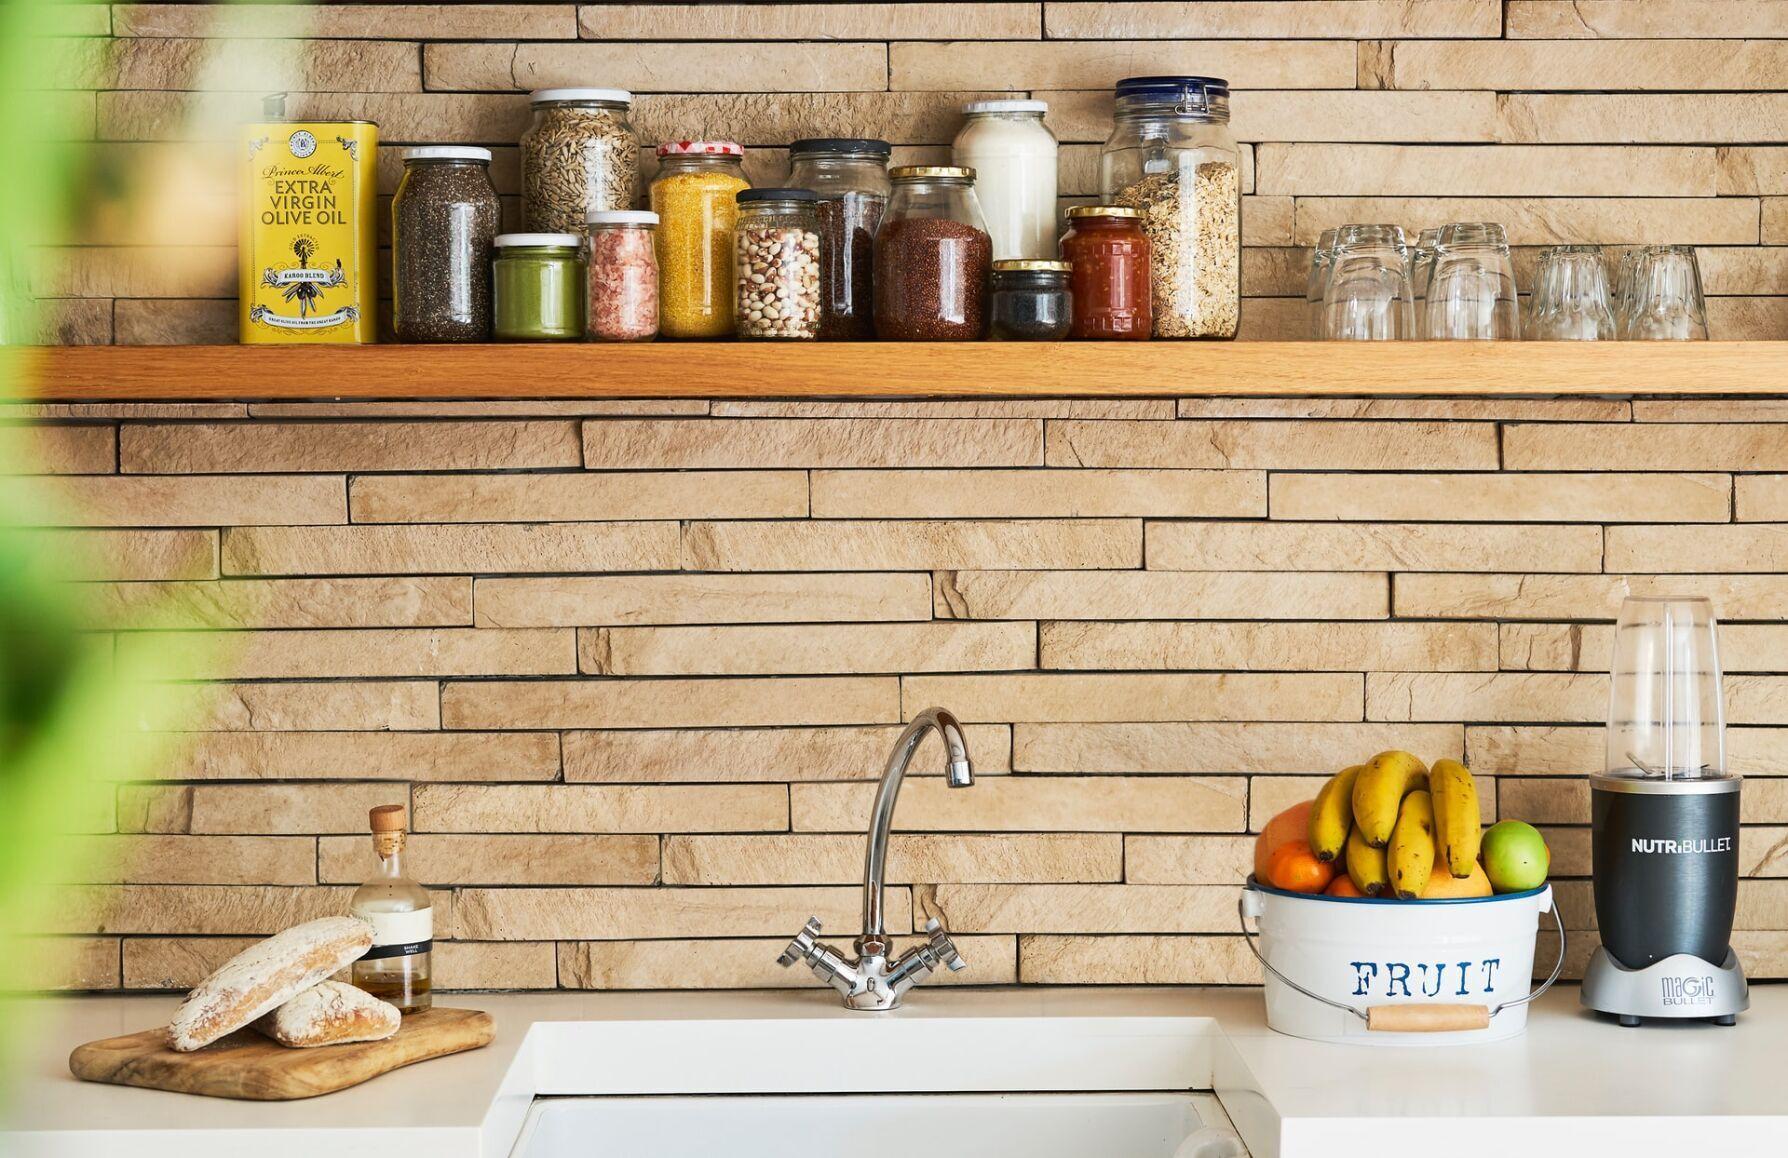 These TikTok small kitchen hacks will give you back your counter space